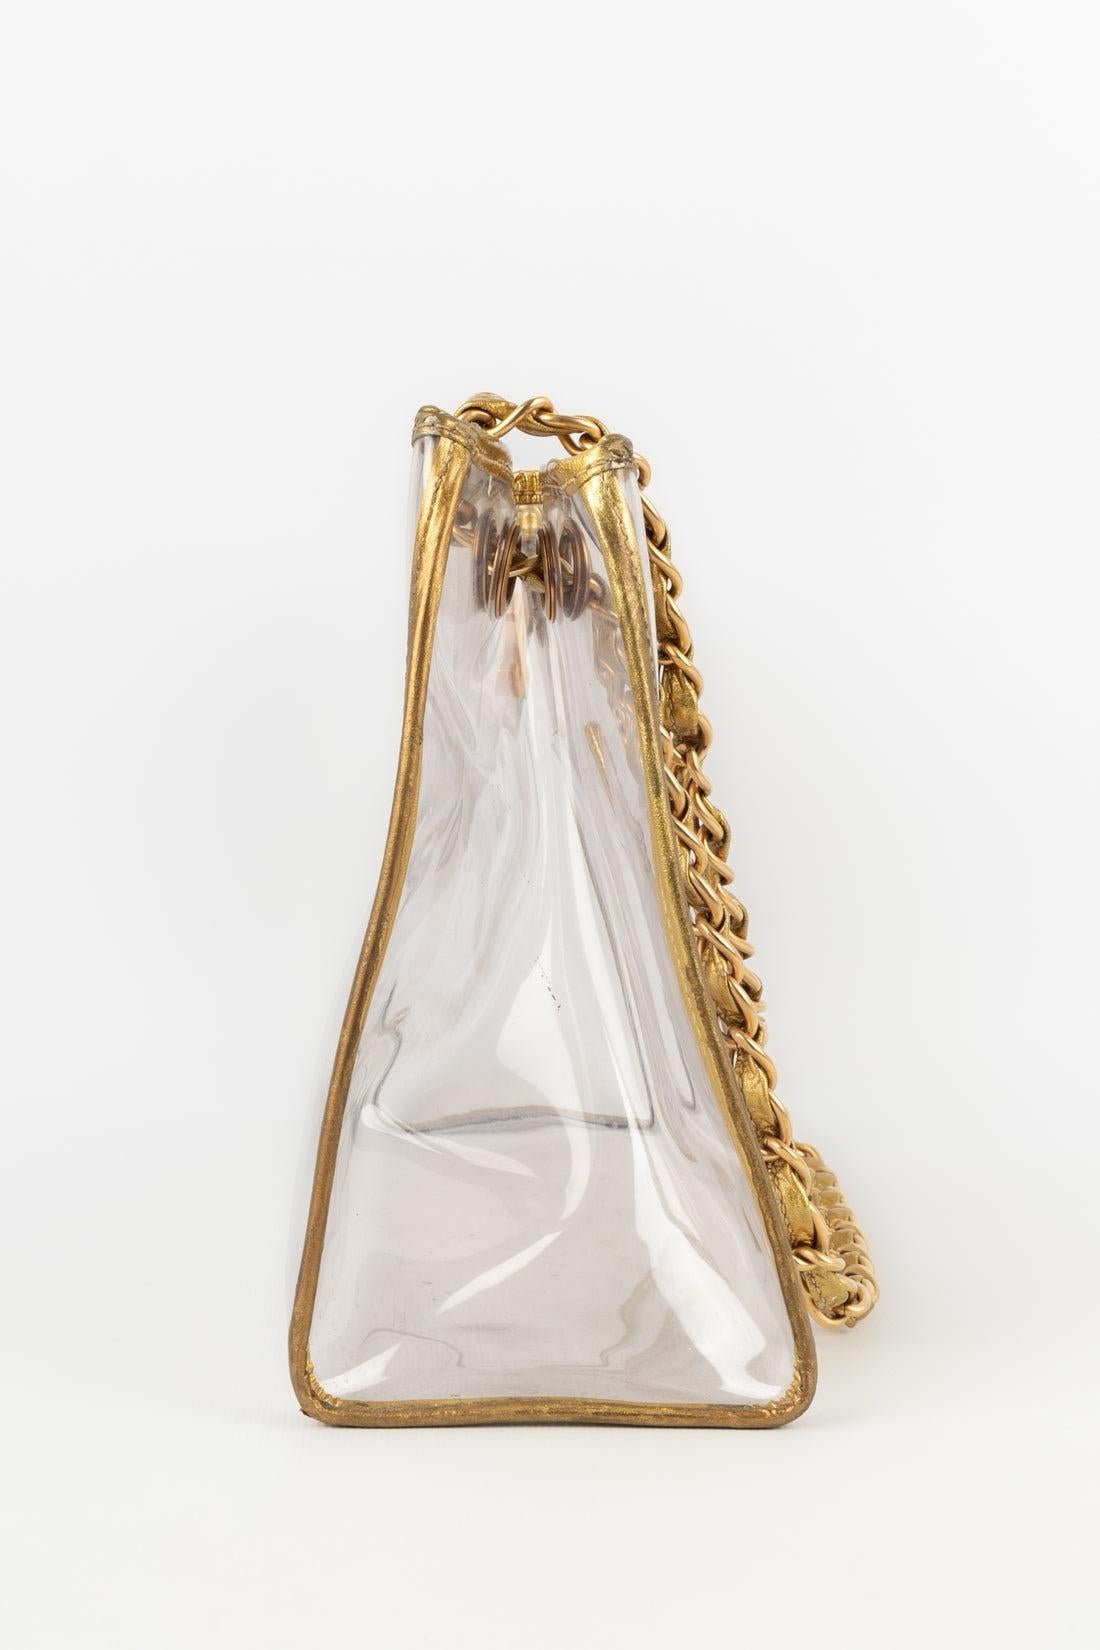 Women's Chanel Hand Bag in Transparent PV Fabric, 2006/2008